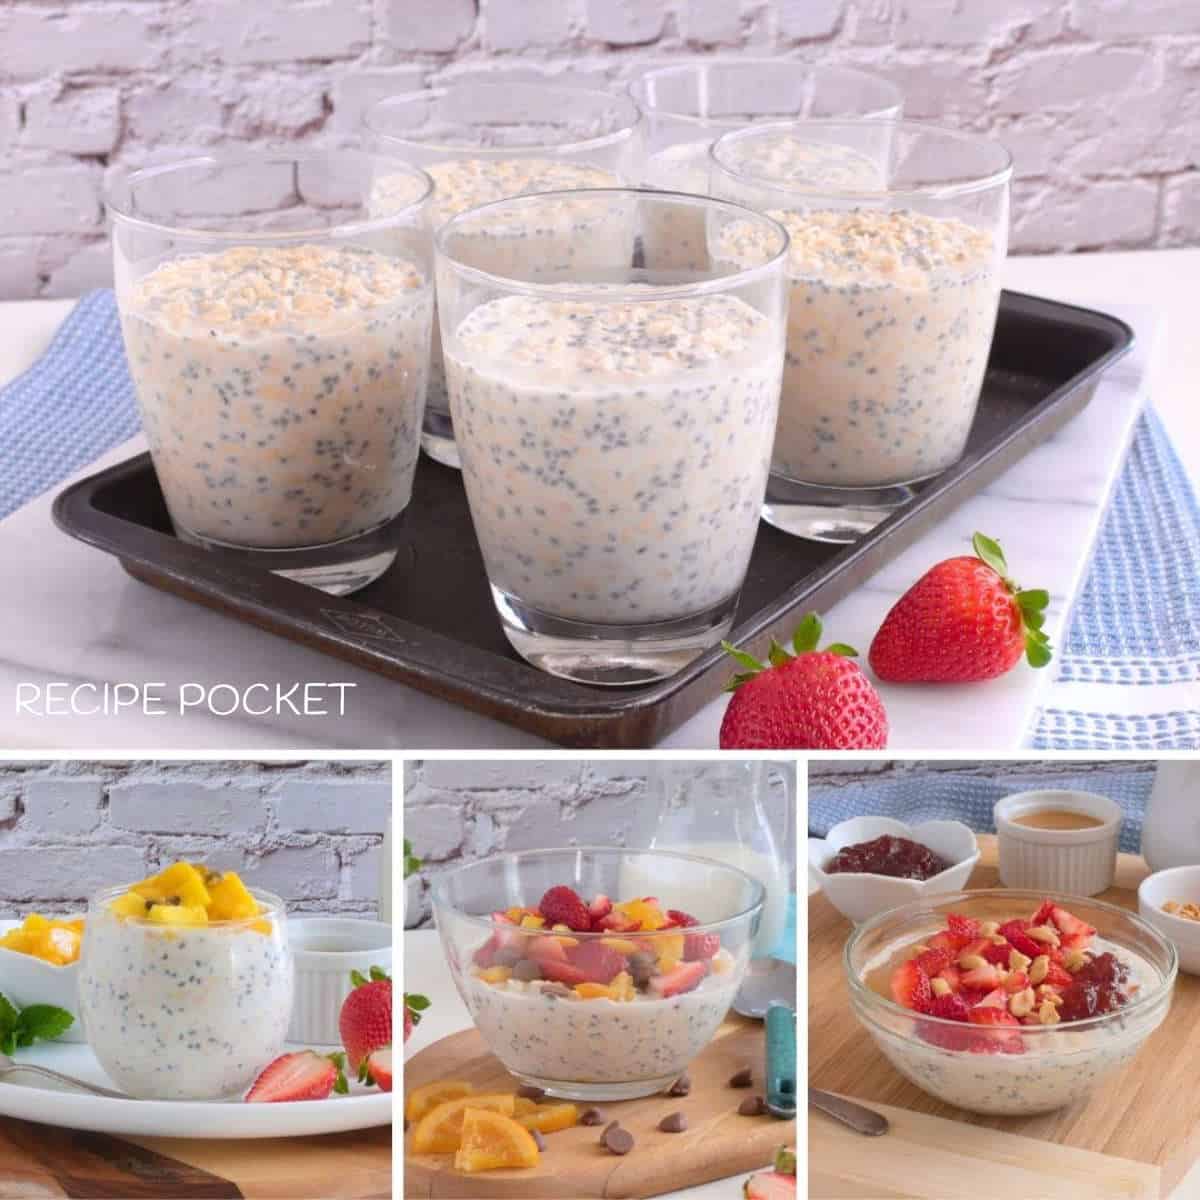 A collage of images showing overnight oats with different toppings.